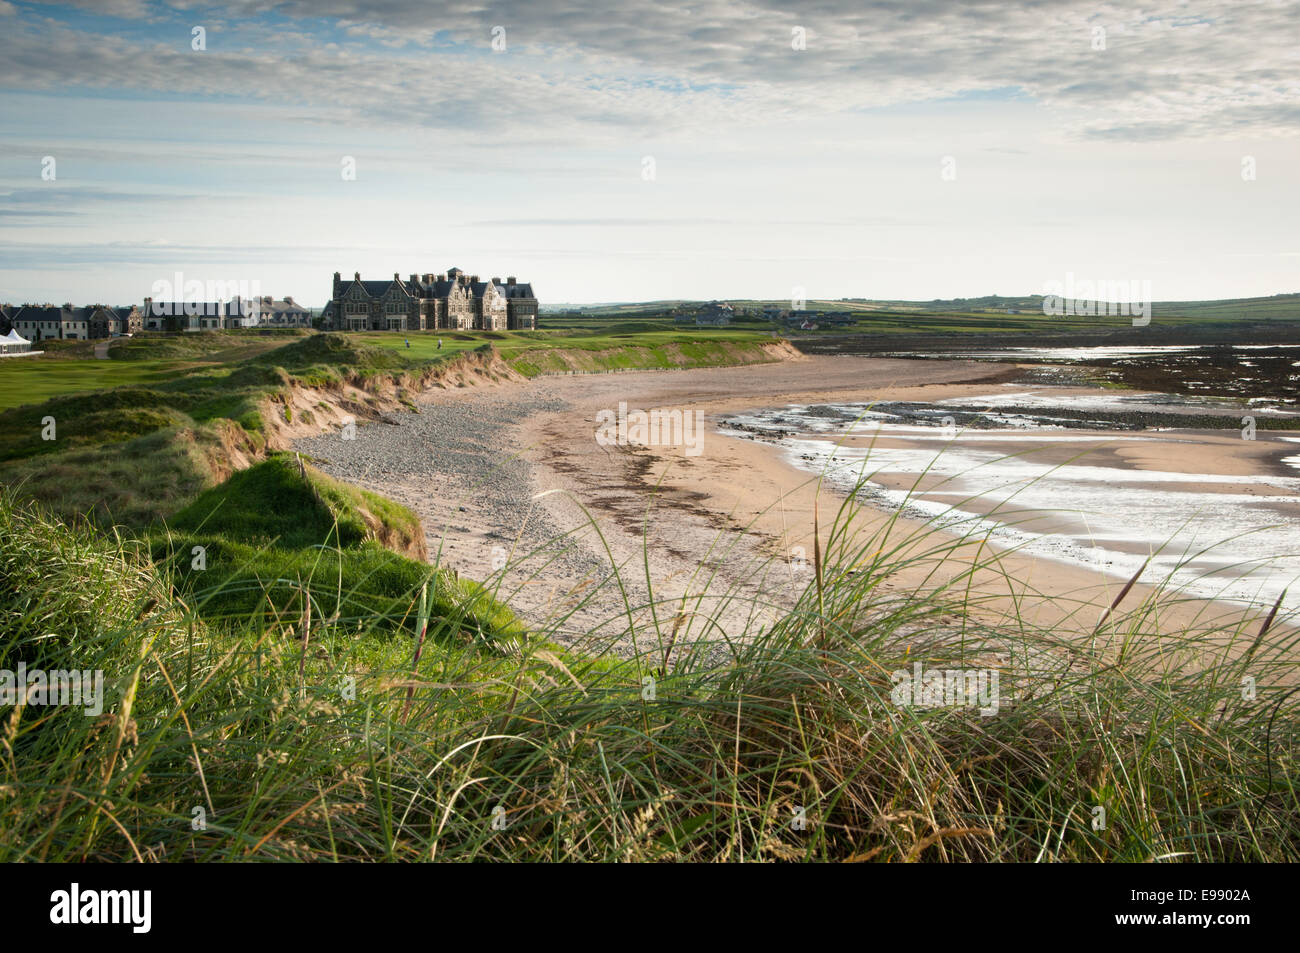 Trump Golf Resort and Hotel at Doonbeg in County Clare along the Wild Atlantic Way on the West Coast of Ireland Stock Photo